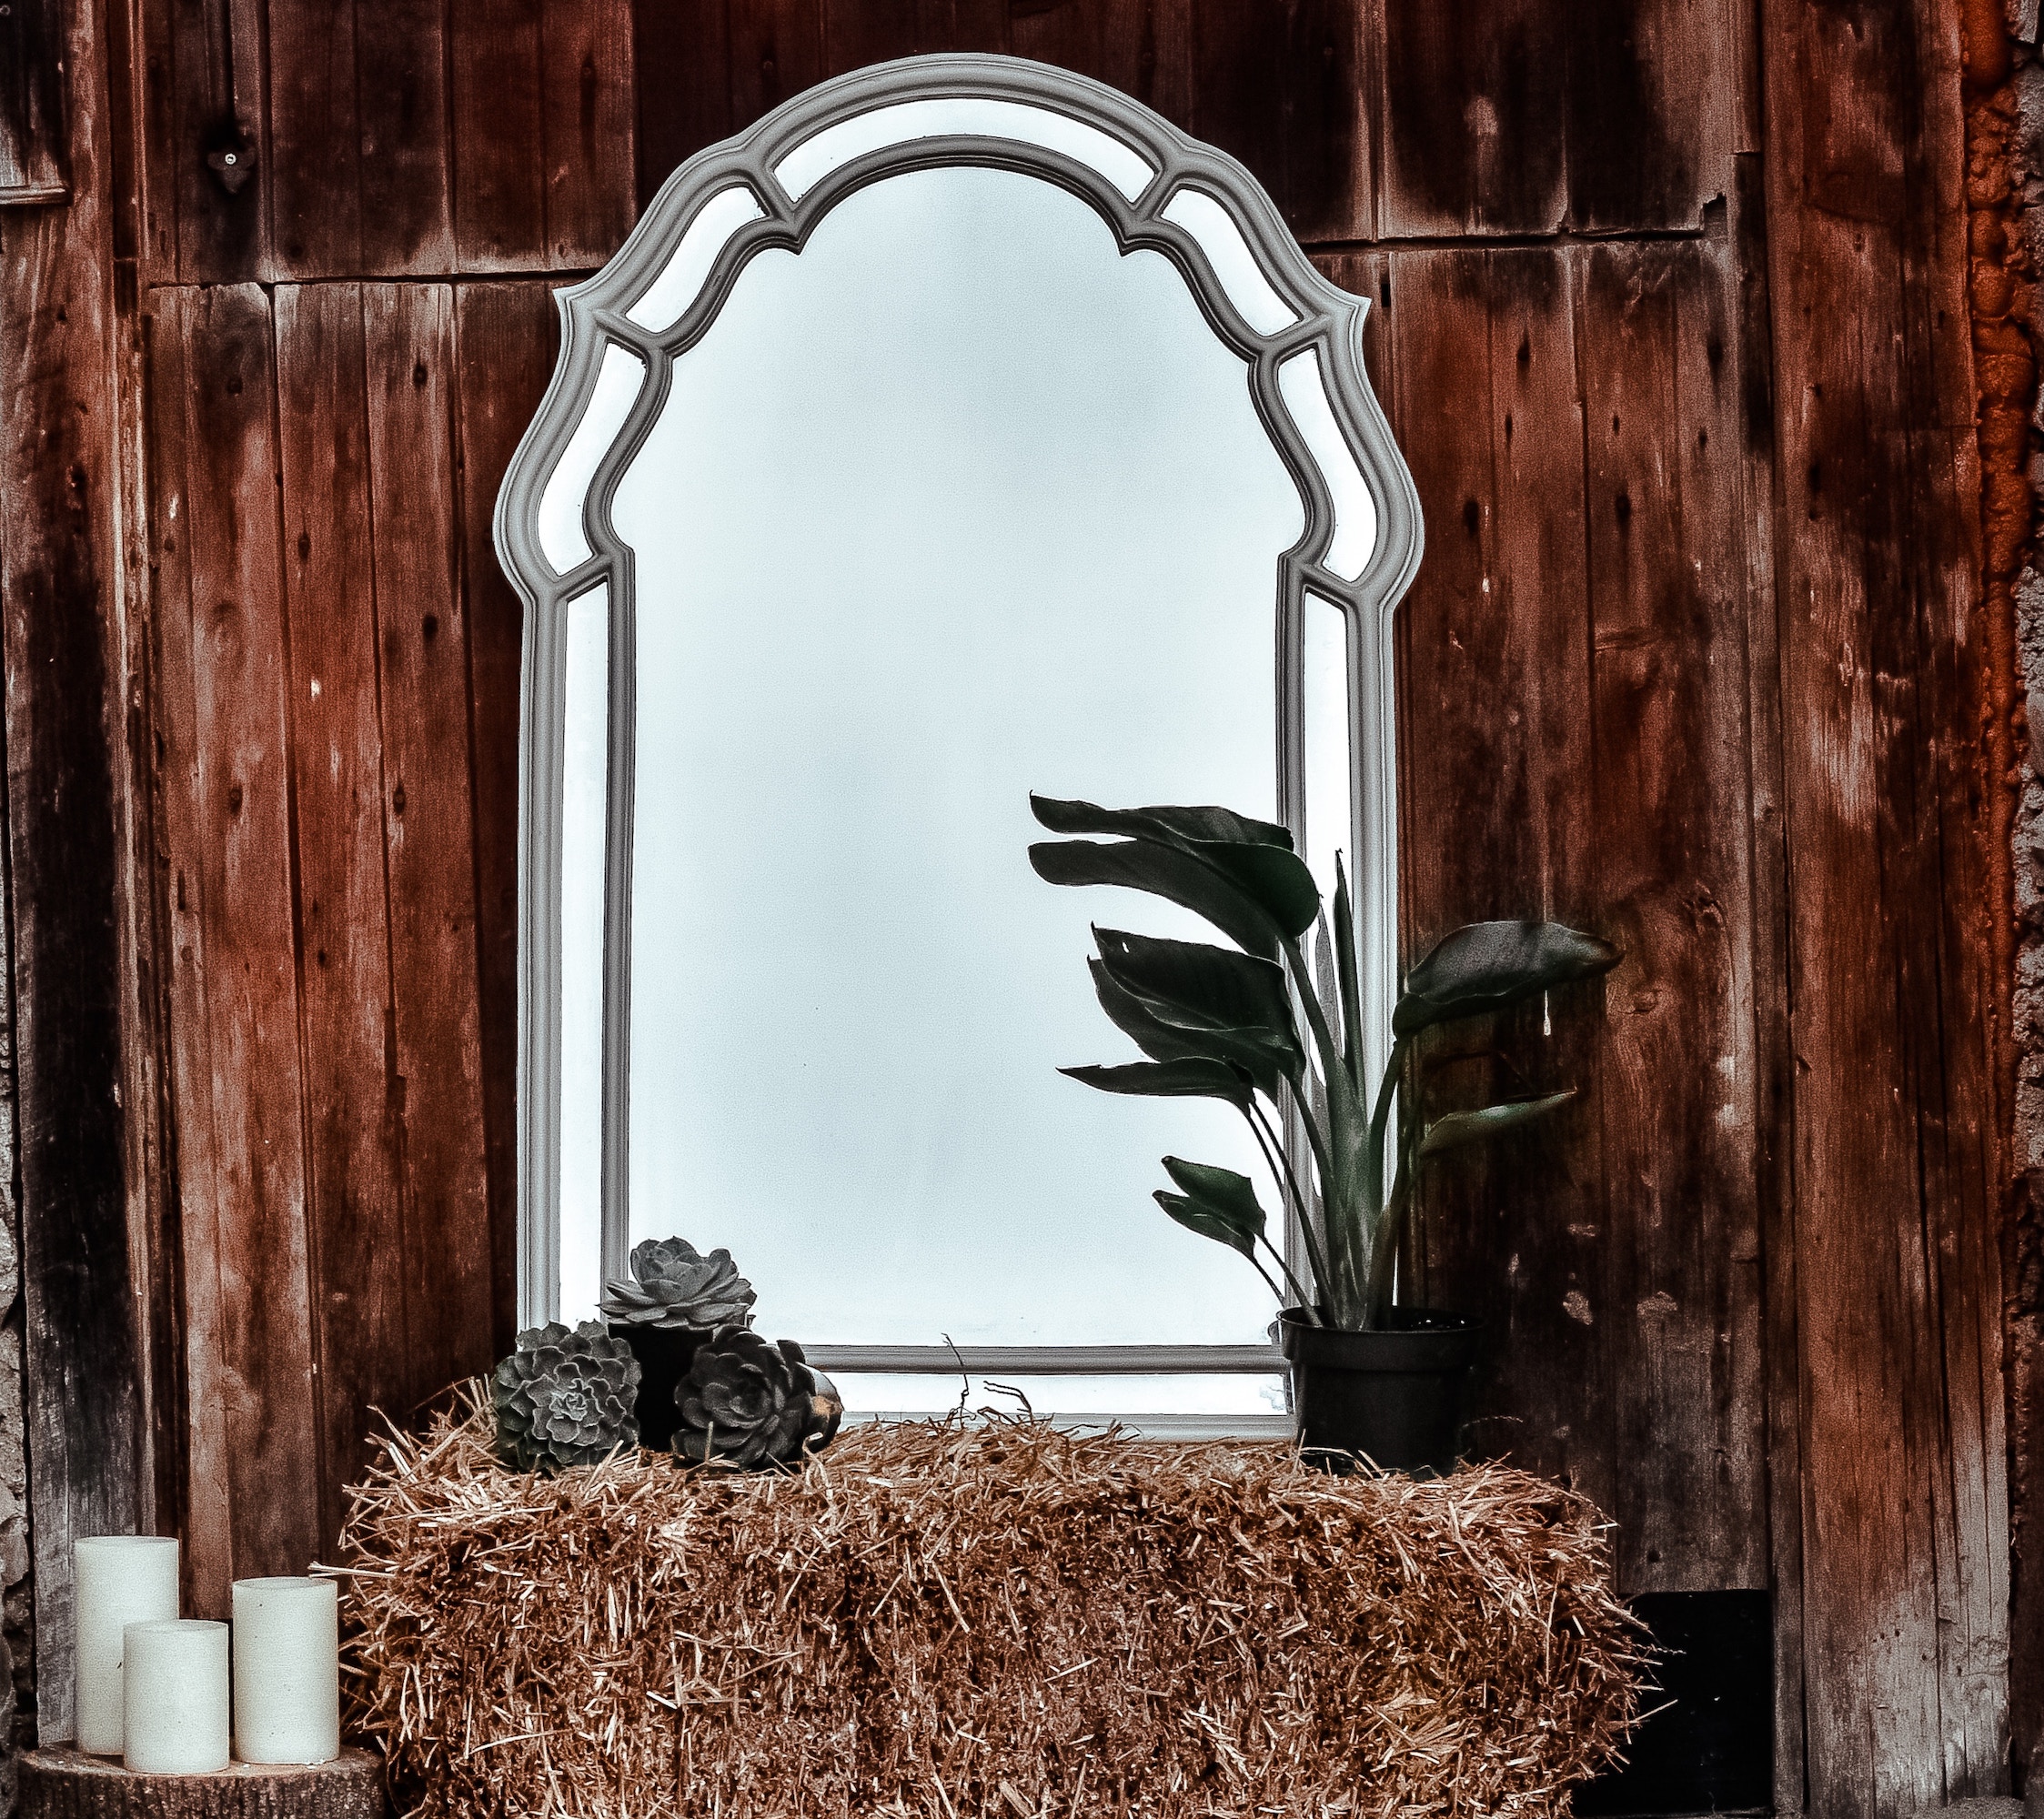 Mirror on hay bale with candles and plants